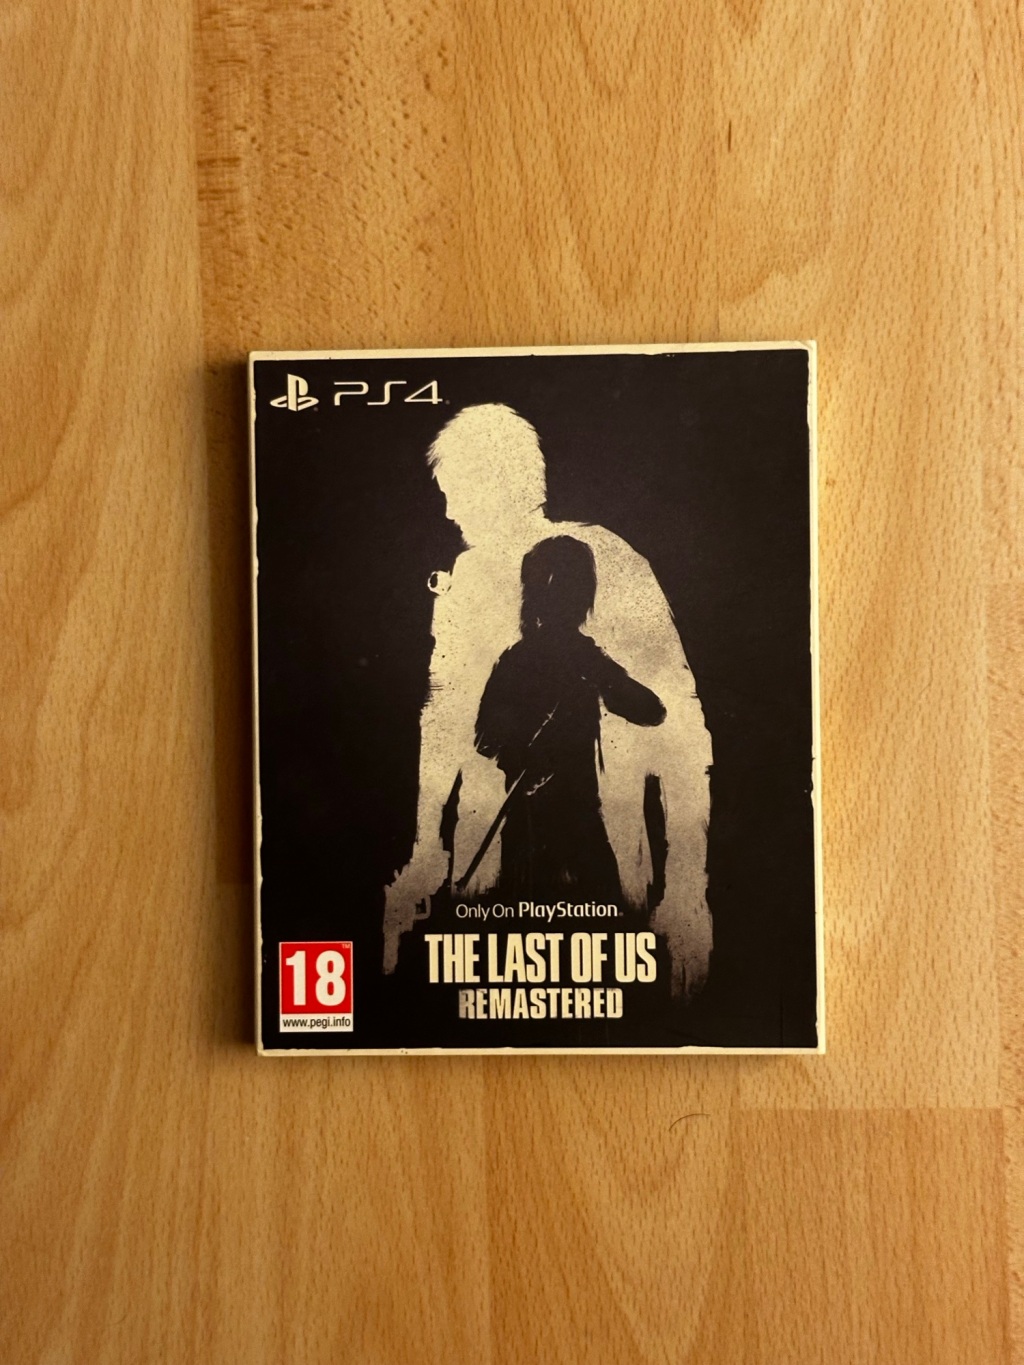 The Last of Us Remastered “Only on Playstation” Sleeve